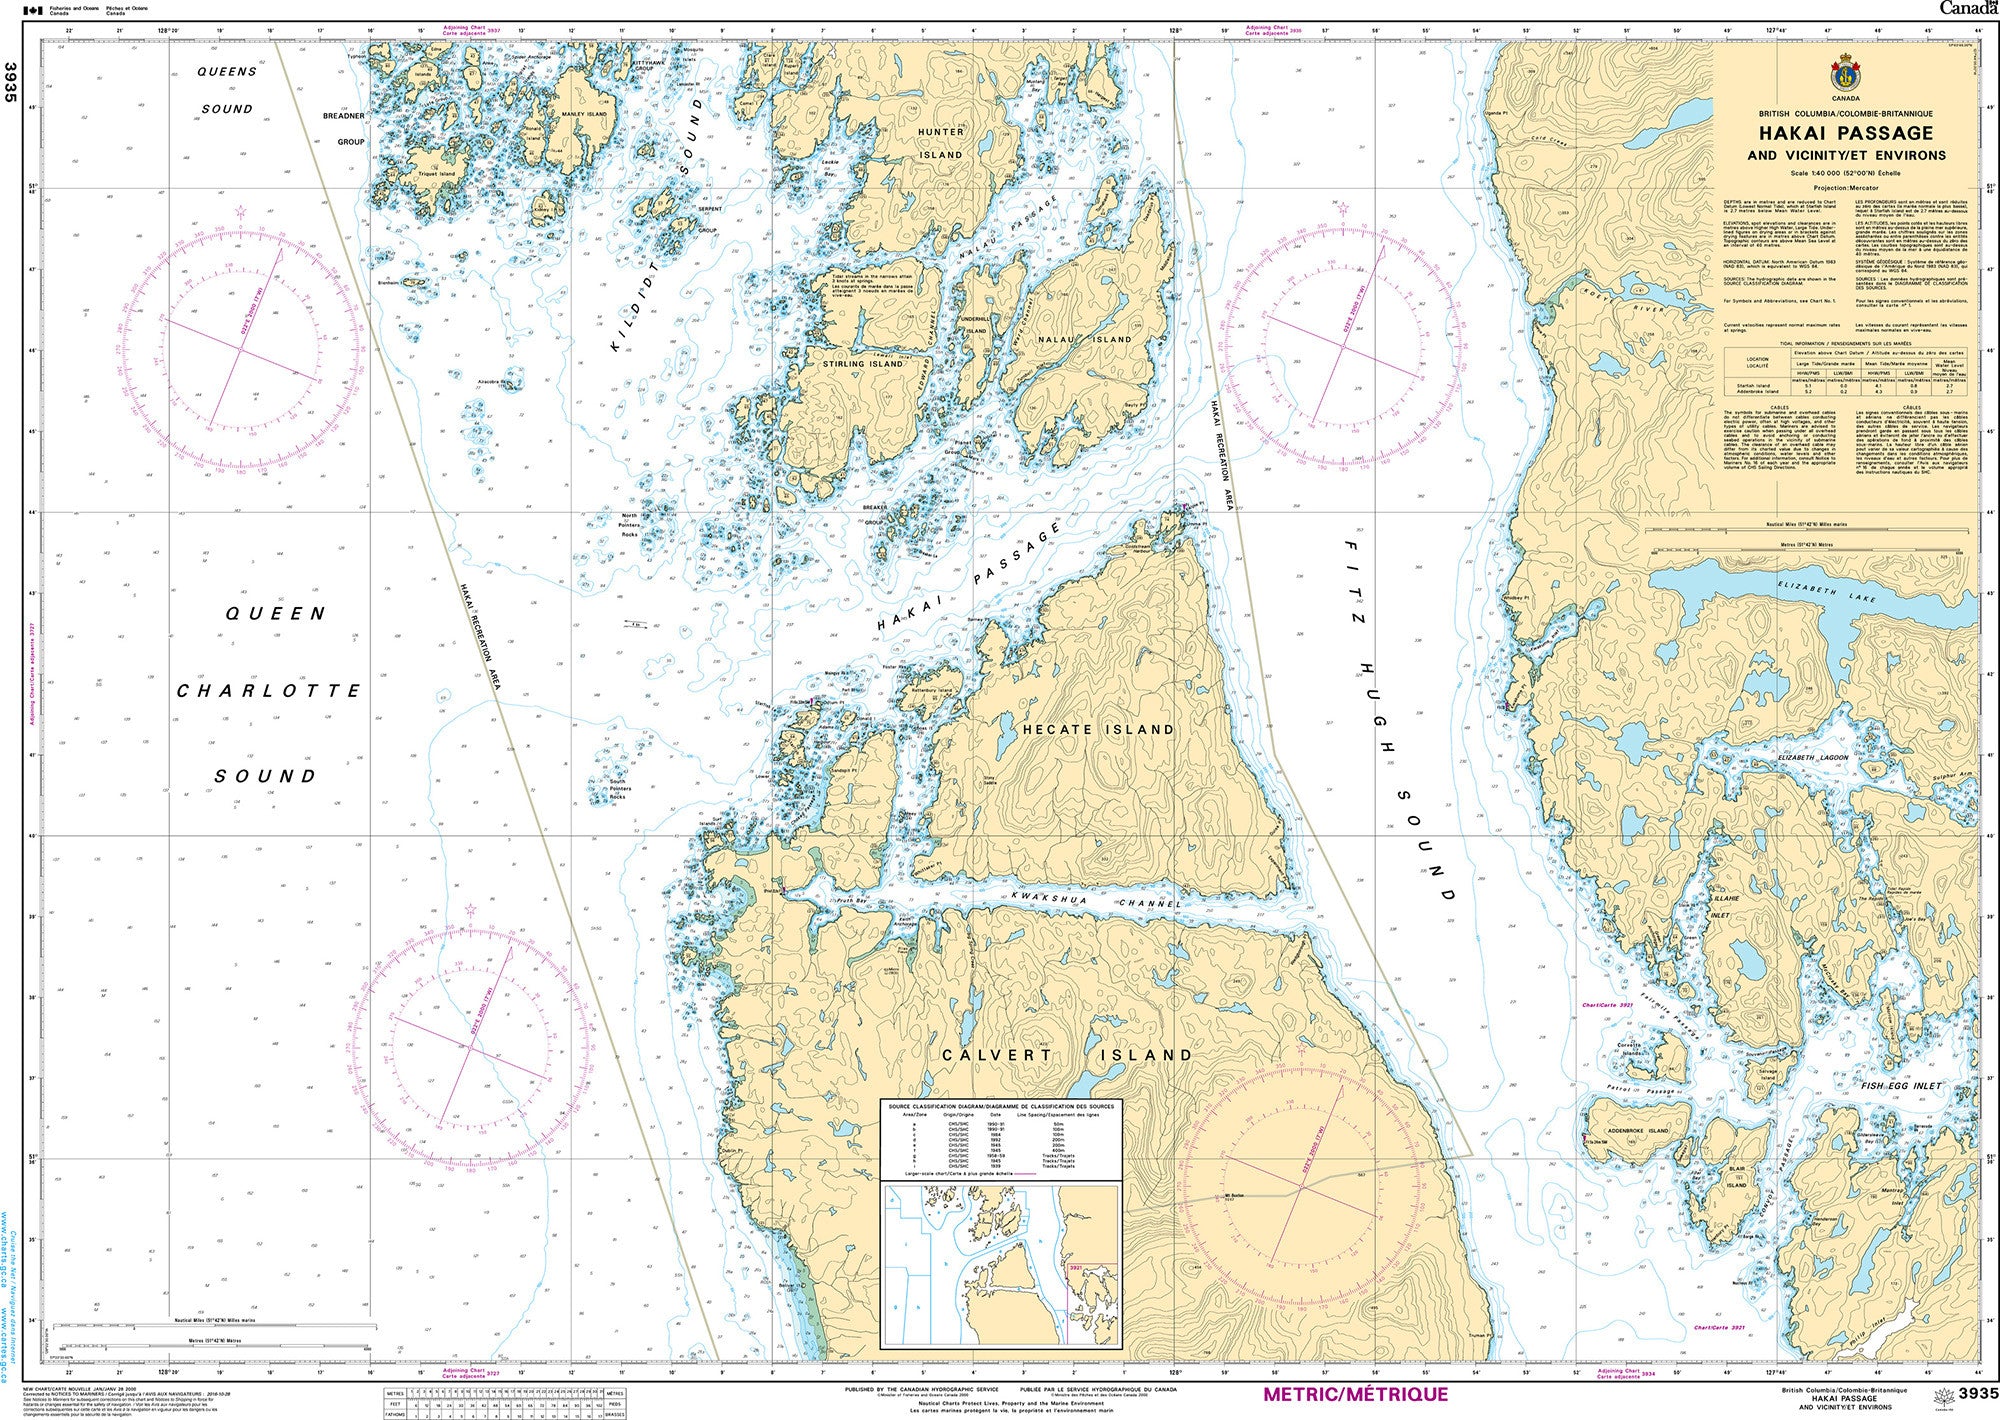 Canadian Hydrographic Service Nautical Chart CHS3935: Hakai Passage and Vicinity/et Environs